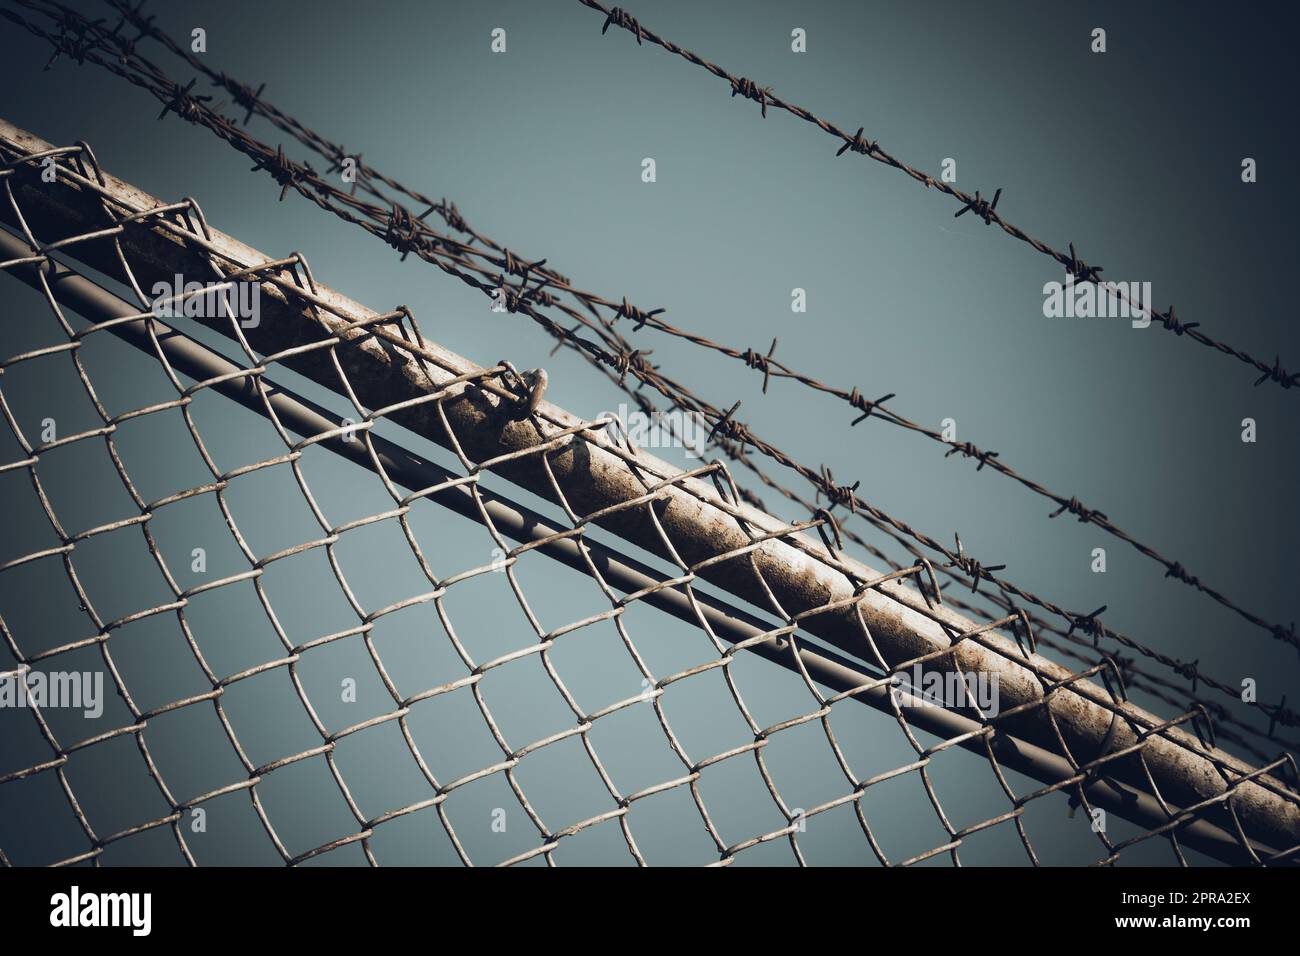 Barbed wire fence against dramatic, dark sky Stock Photo